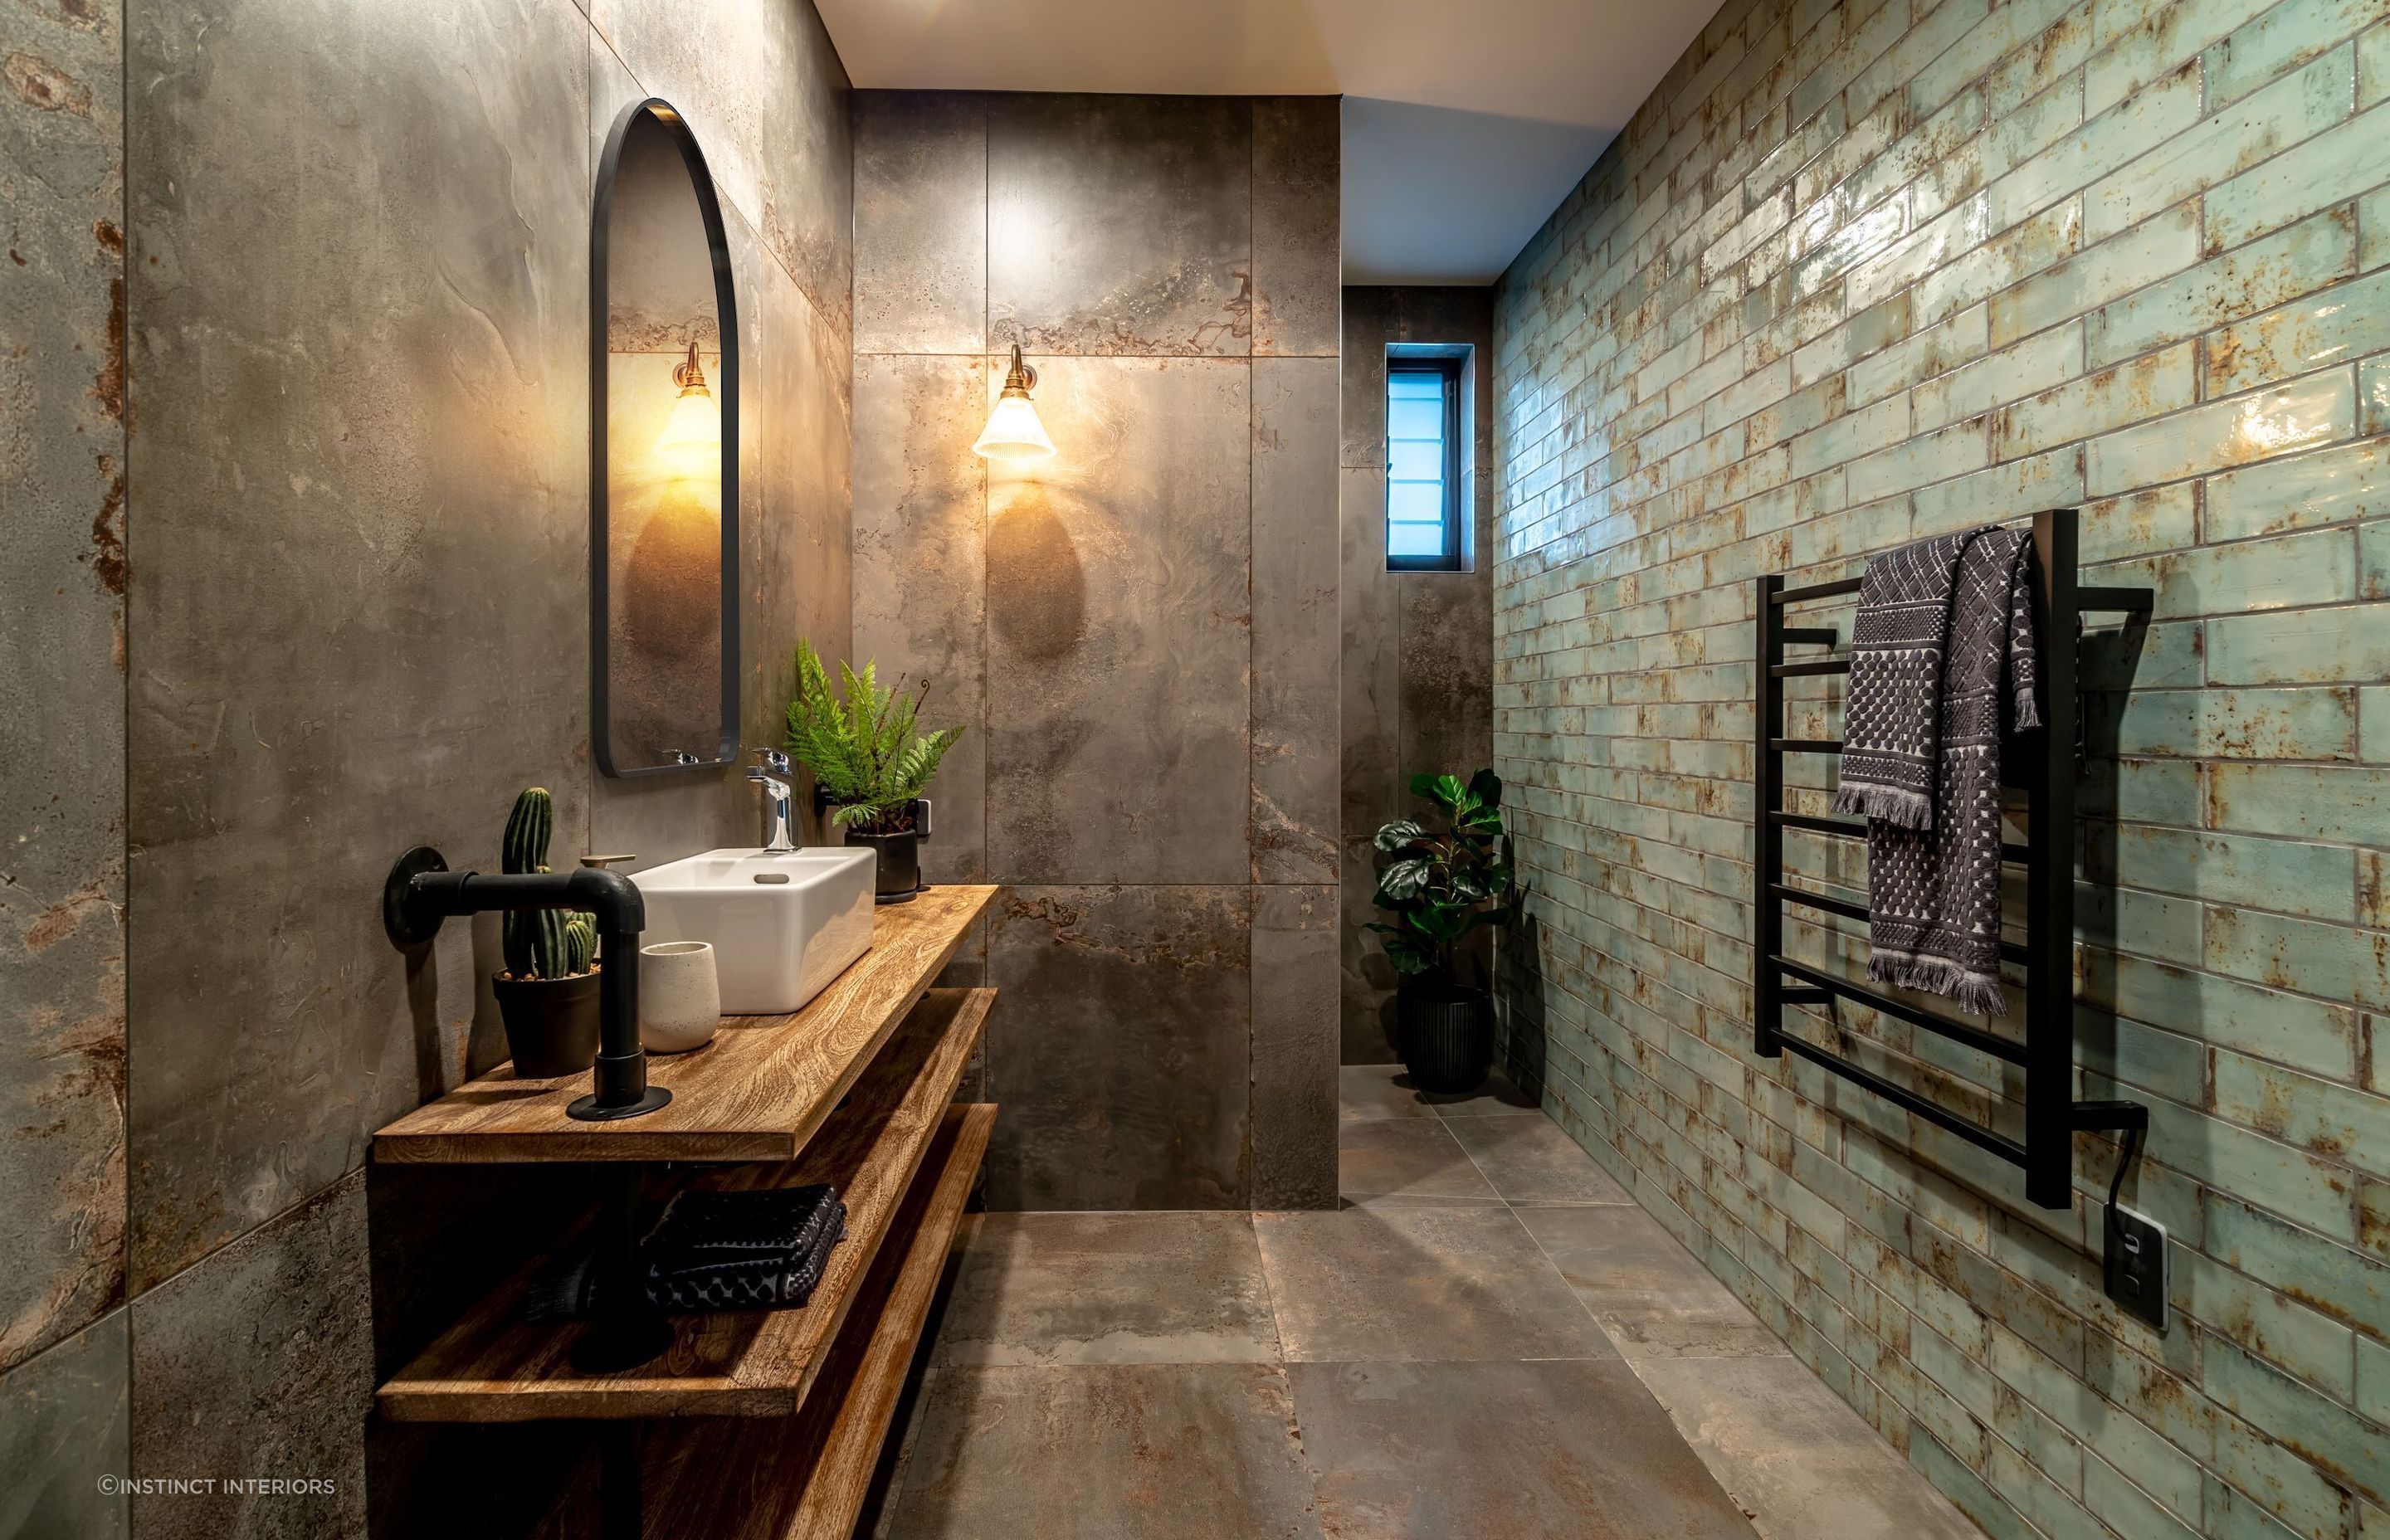 Textured tiles, exposed plumbing, timber shelving — just some of the raw materials incorporated in this bathroom in Alexandra.